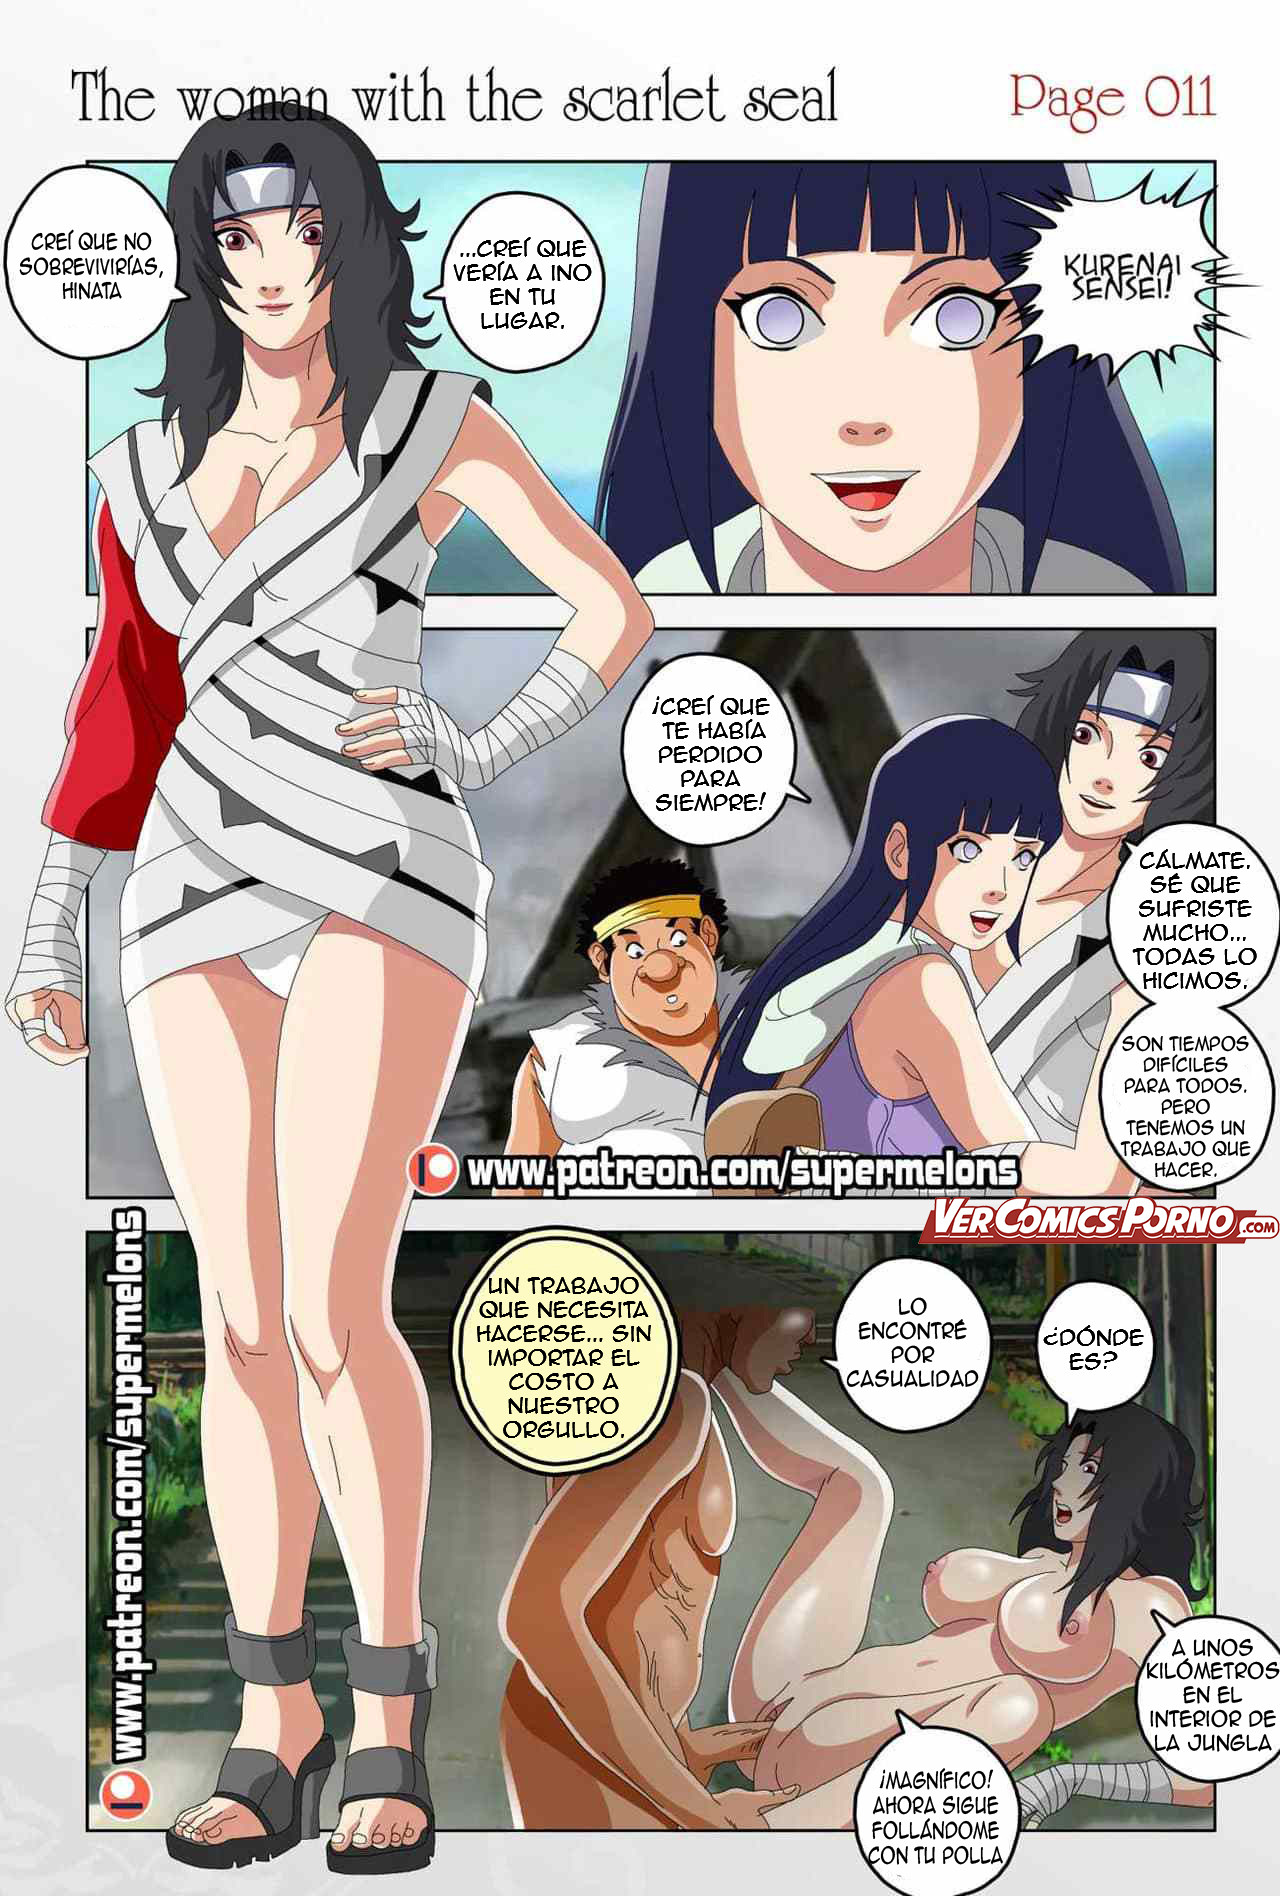 [Super Melons] The Woman with the Scarlet Seal (Traduccion Exclusiva) - 11